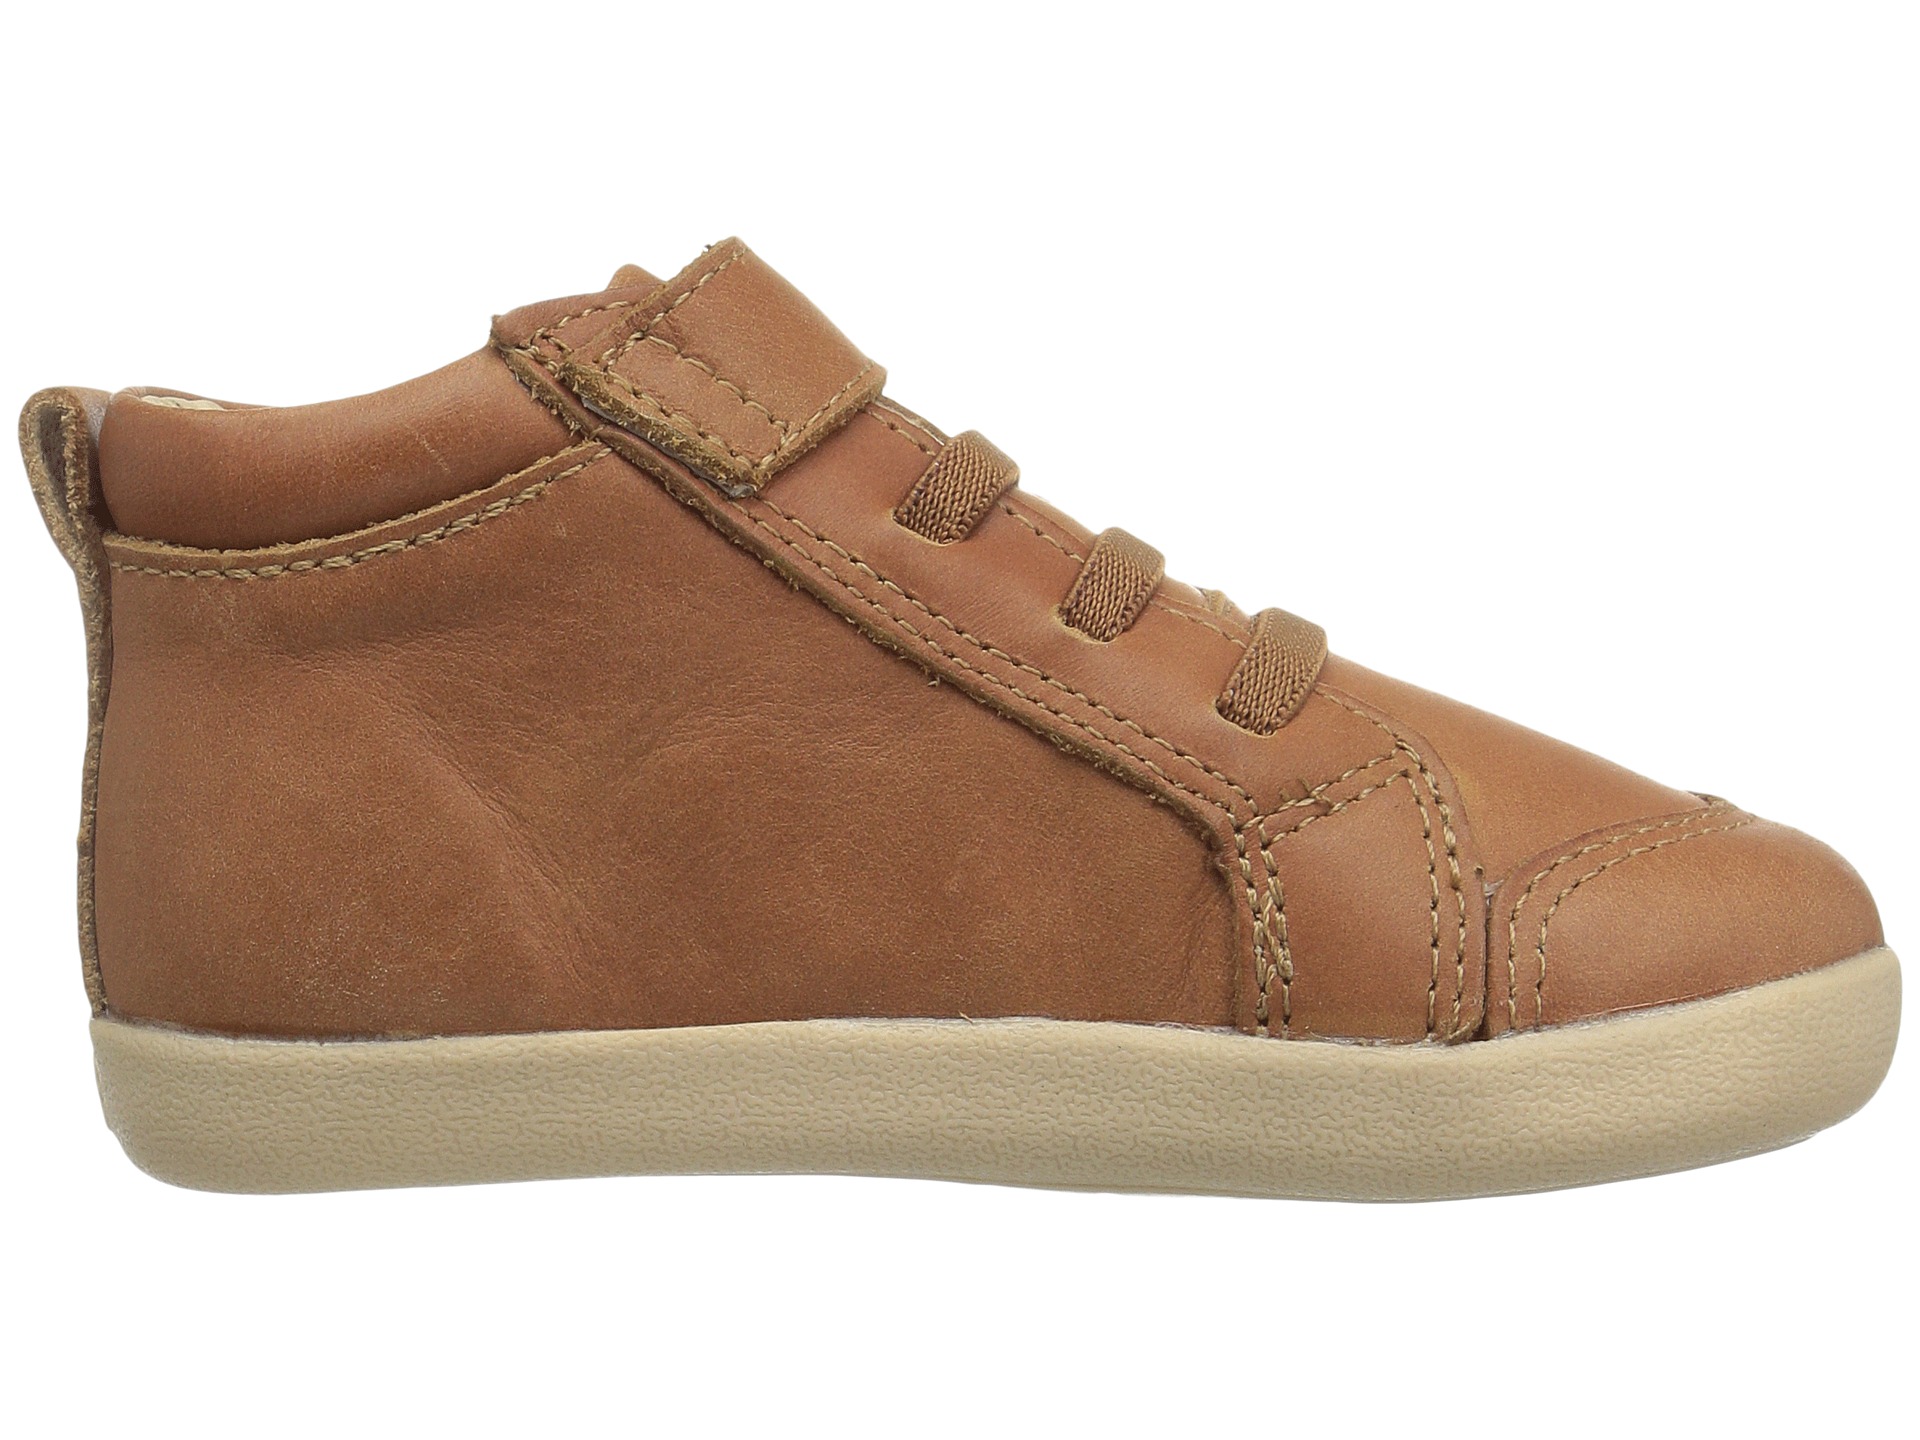 Old Soles Sure Step (Toddler/Little Kid) Tan - Zappos.com Free Shipping ...